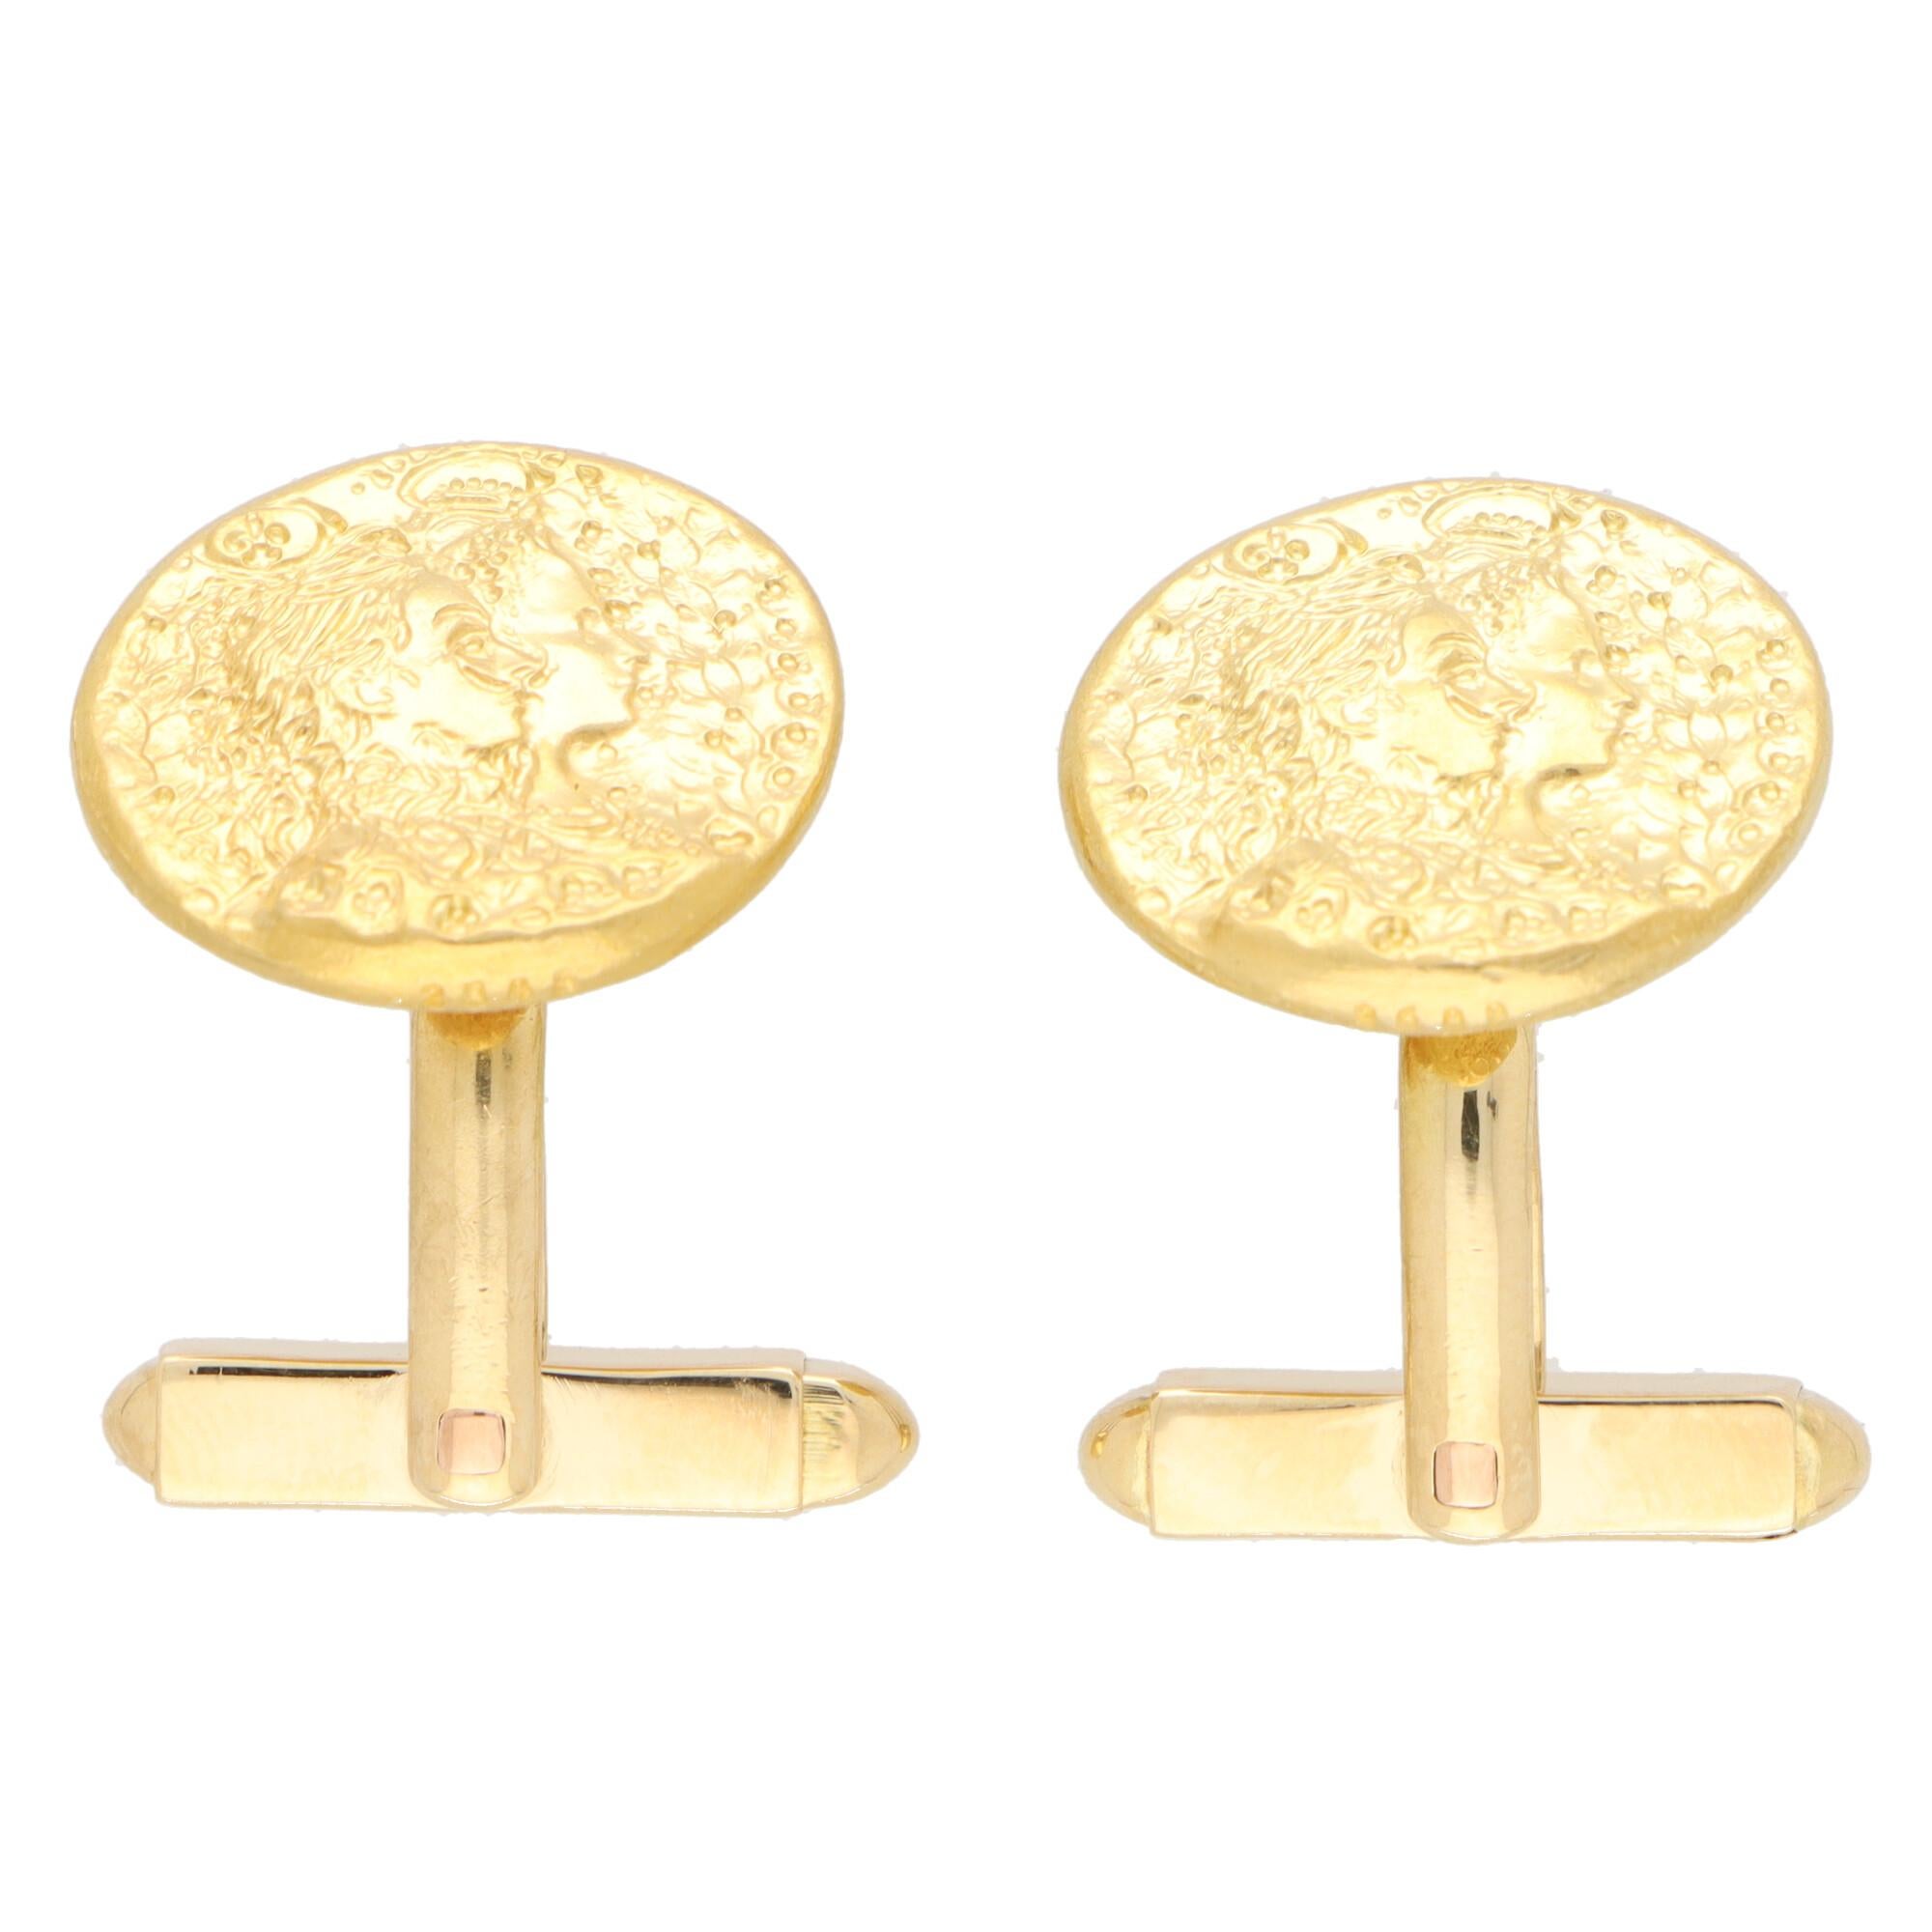  A rare pair of limited-edition Salvador Dali for Piaget coin swivel back cufflinks set in 22k and 18k yellow gold. 

Designed by the famous surrealist painter Salvador Dali, these cufflinks were inspired by his hero, the French King - Louis XIV.